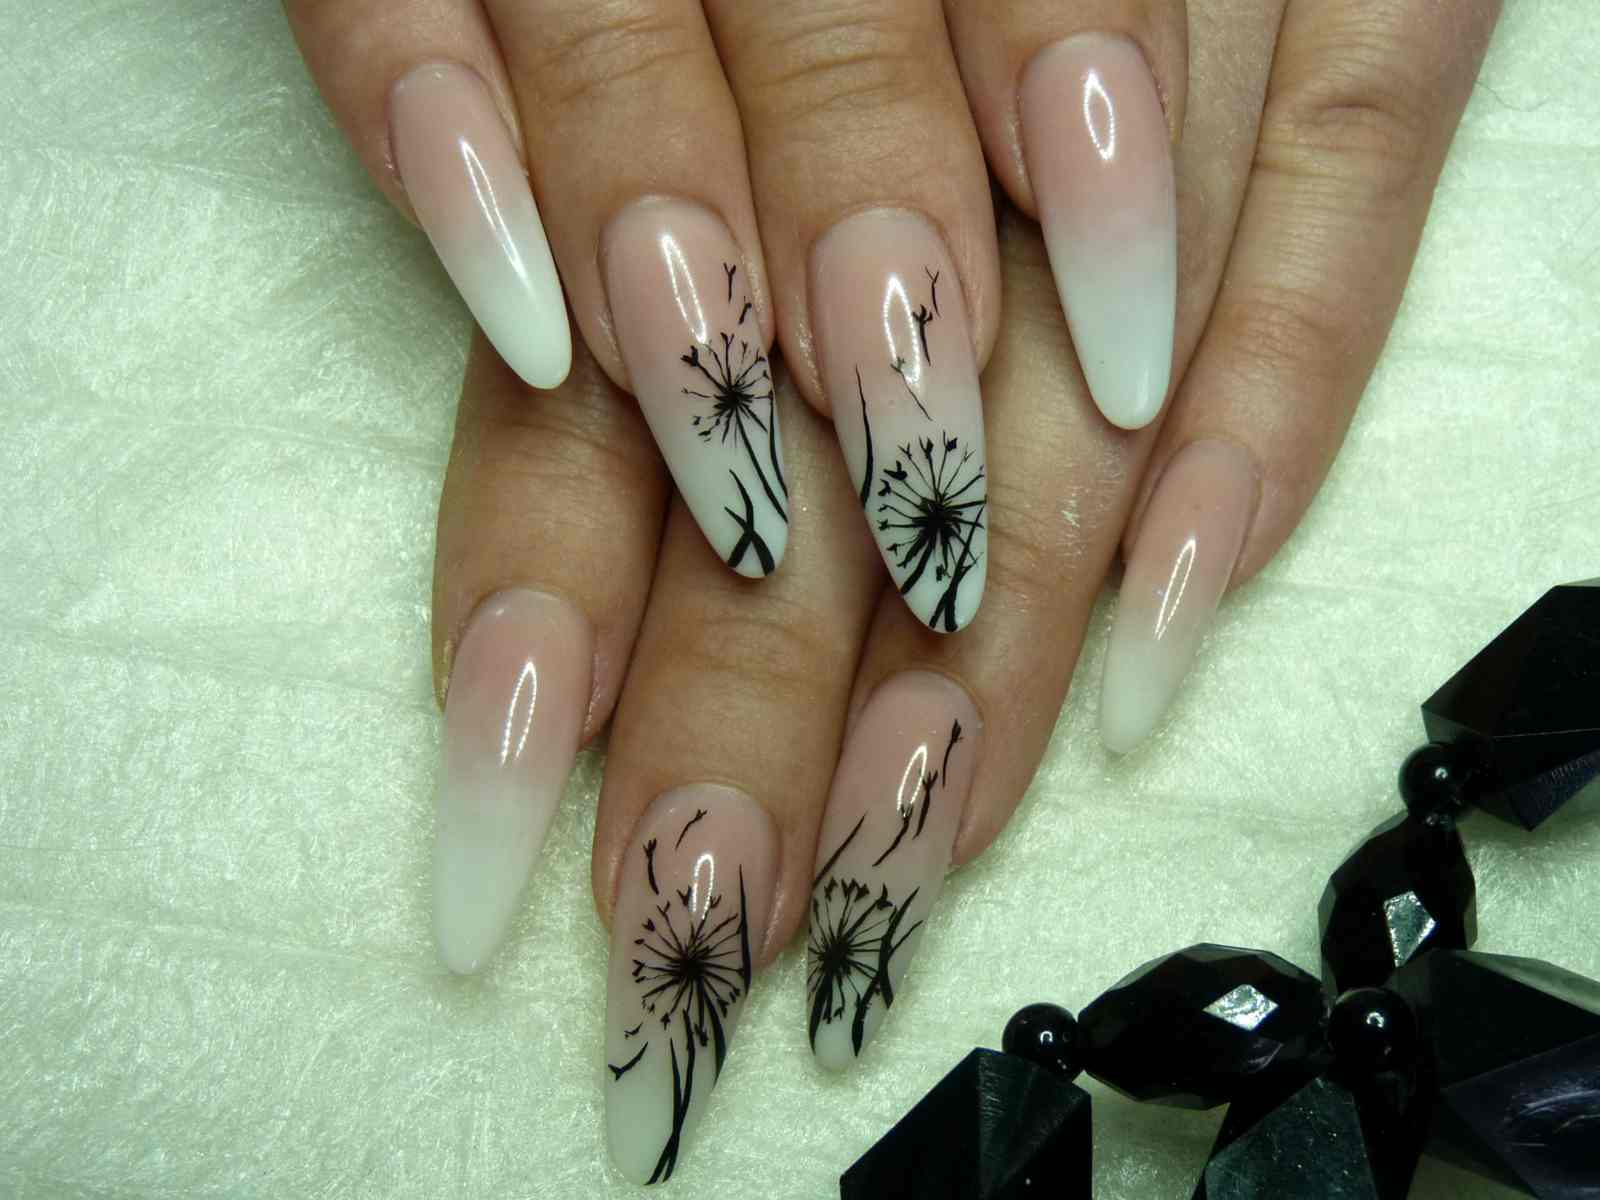   Baby Boomer Nails in almond shape long nail design Idea Nail Trends Summer 